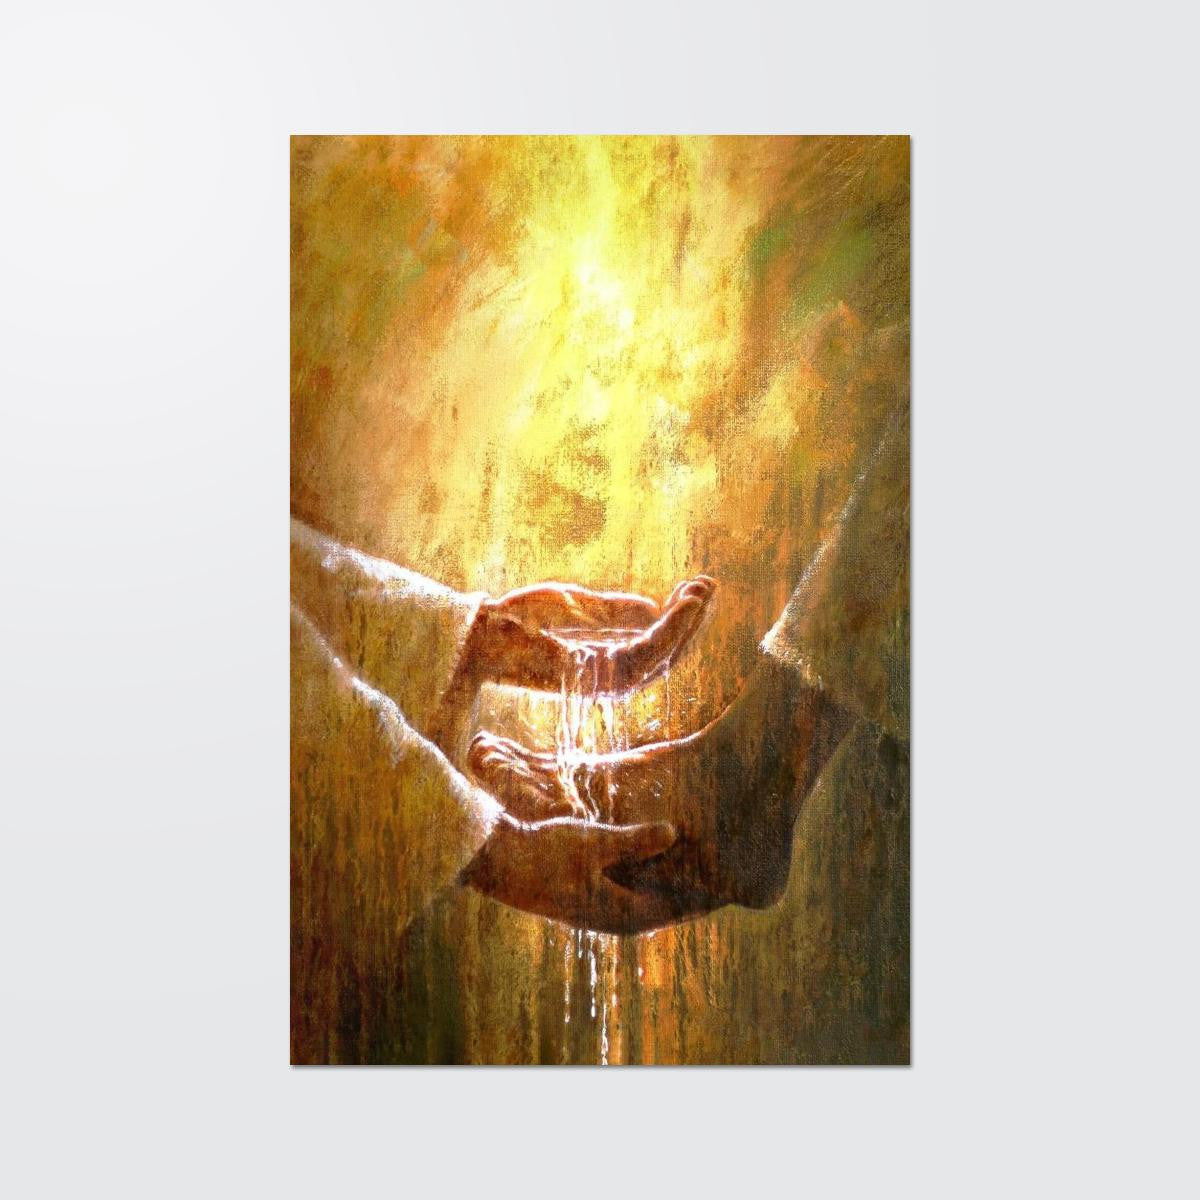 Foot Washing Picture Of Jesus Christ Canvas - Washing The Feet Of One Of The Apostles Or Disciples Canvas - Jesus Canvas - Christian Wall Art